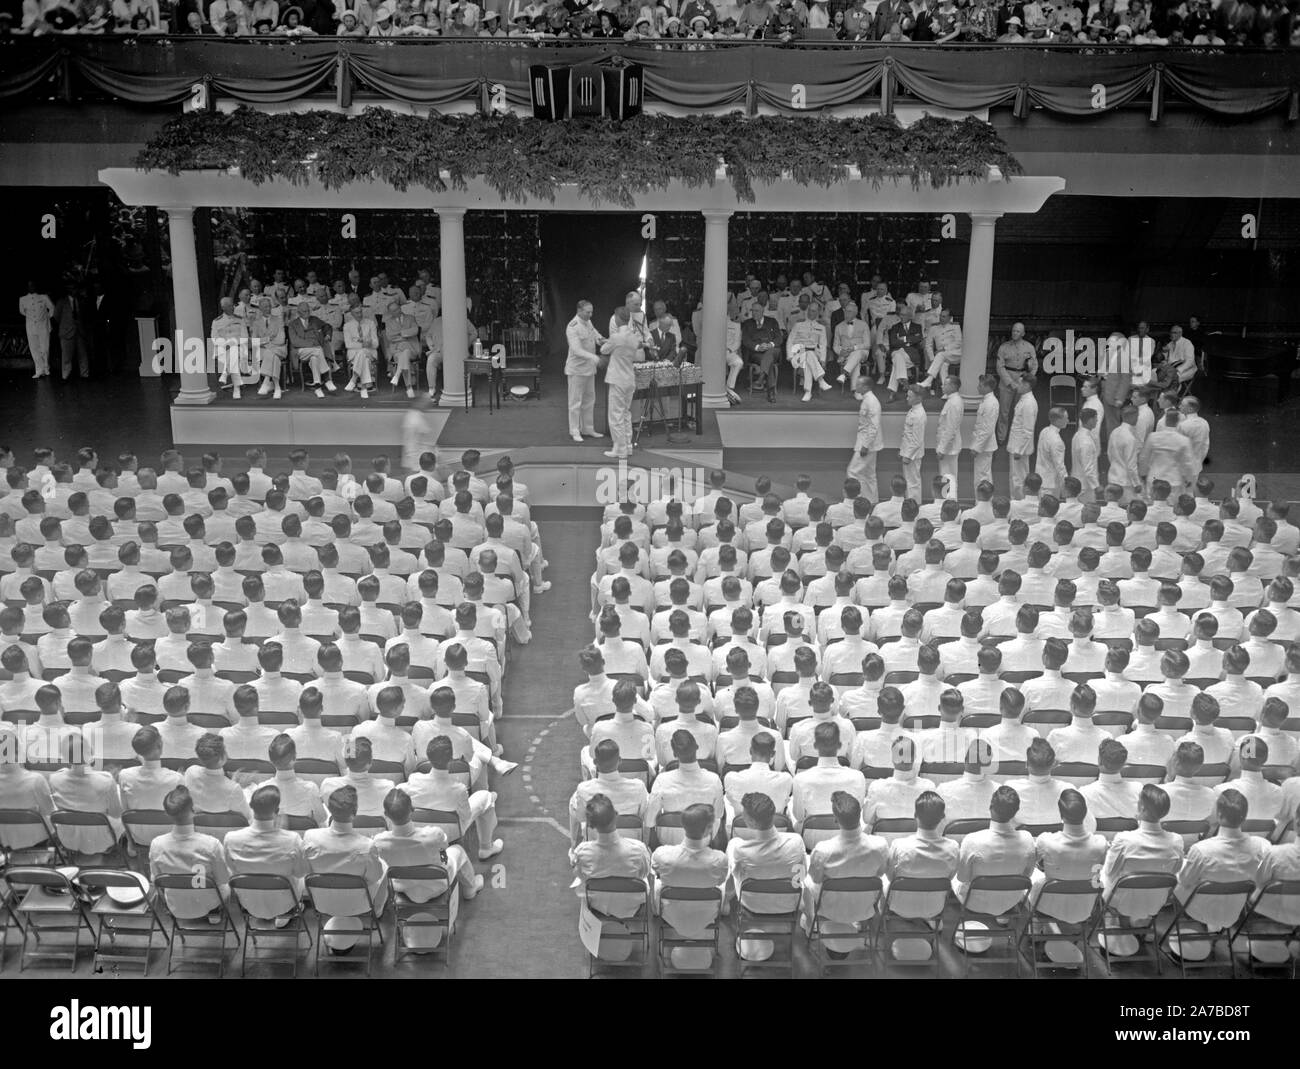 Graduation day at Annapolis. Annapolis, MD, June 3. 319 midshipmen received their diplomas and the degree of Bachelor of Science today before a cheering crowd of undergraduates, parents, friends, and sweethearts assembled in the huge Naval Academy Armory, Chief of the Bureau of Navigation Adolphus Andrews is shown presenting the diplomas, 6/3/37 Stock Photo